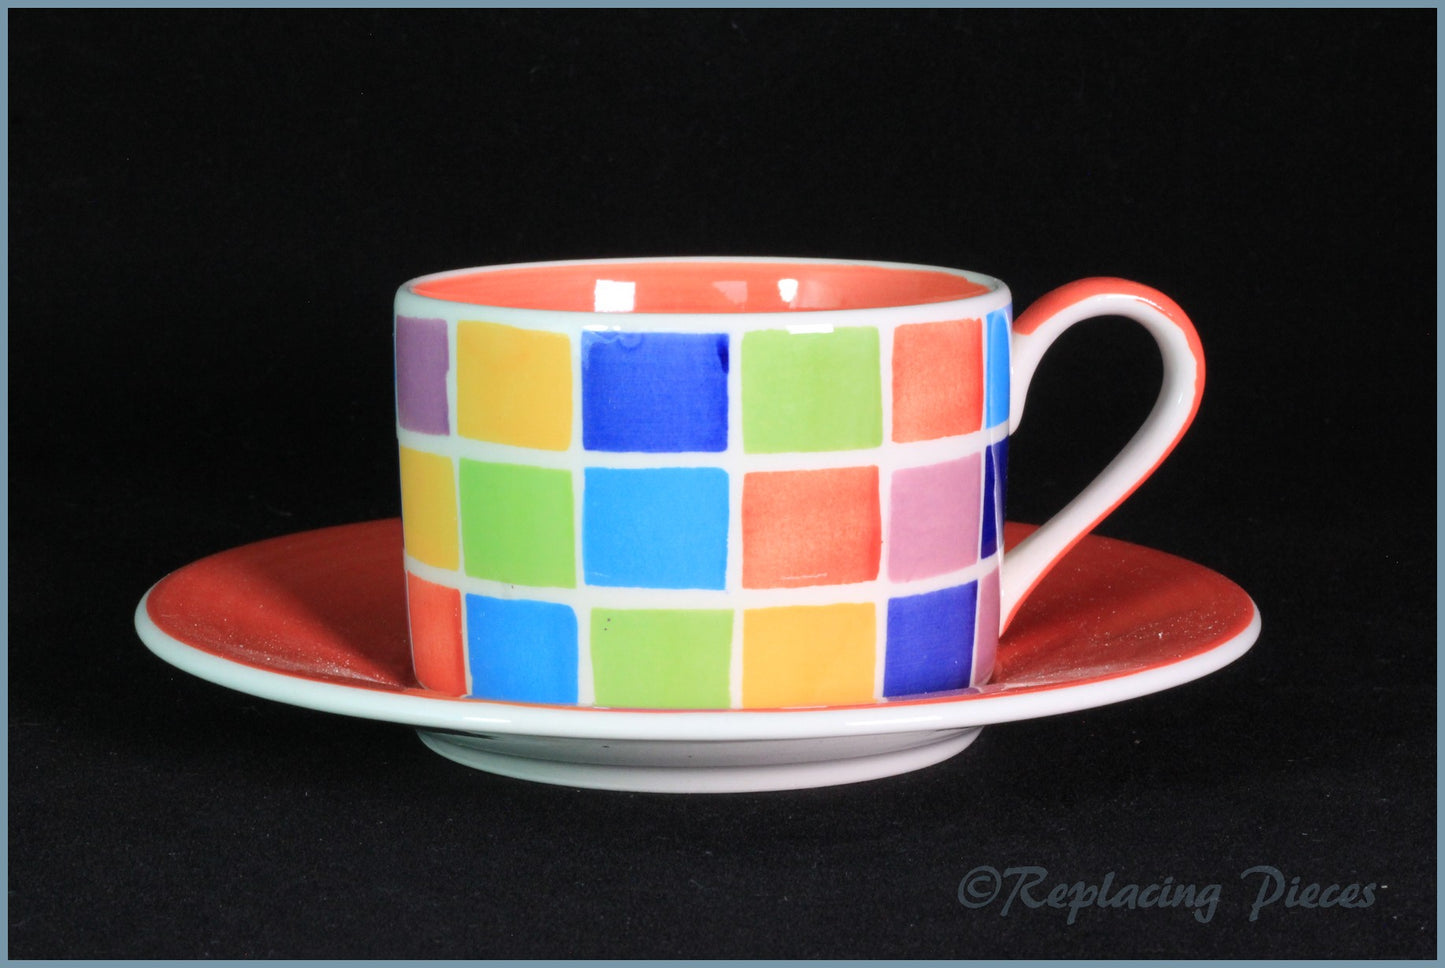 RPW51 - Whittards - Teacup & Saucer (Multi-Coloured Squares)